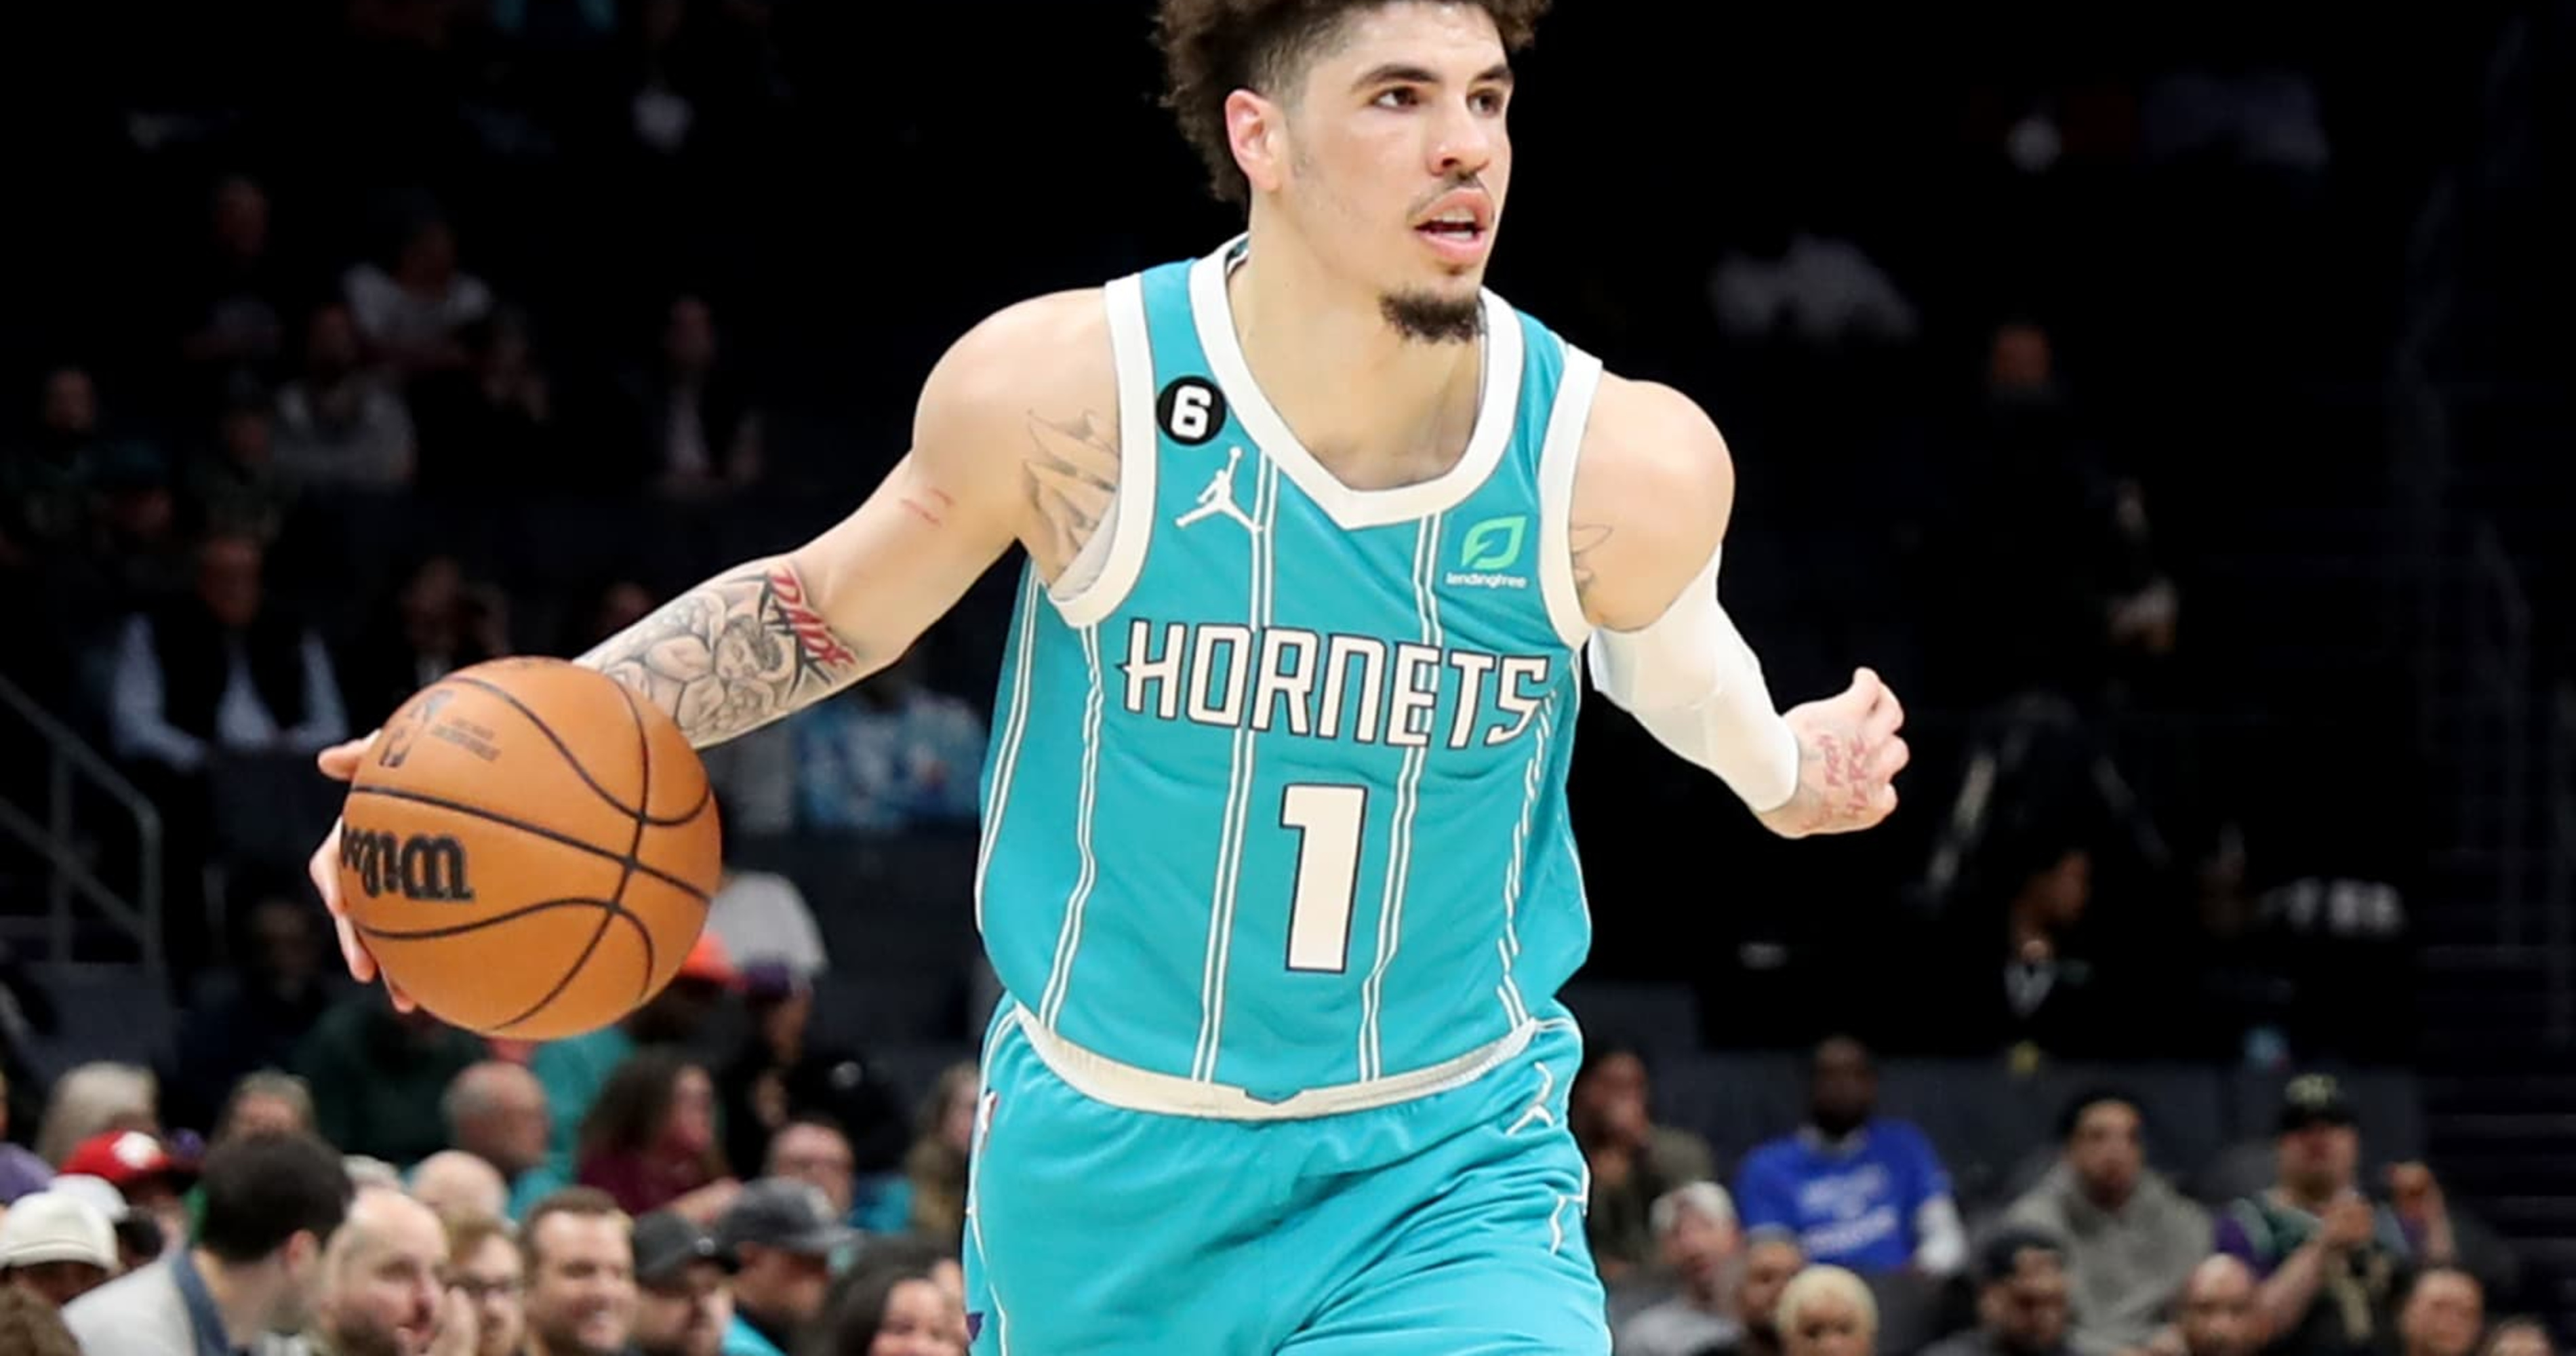 Report: Hornets' LaMelo Ball Out for Season After Suffering